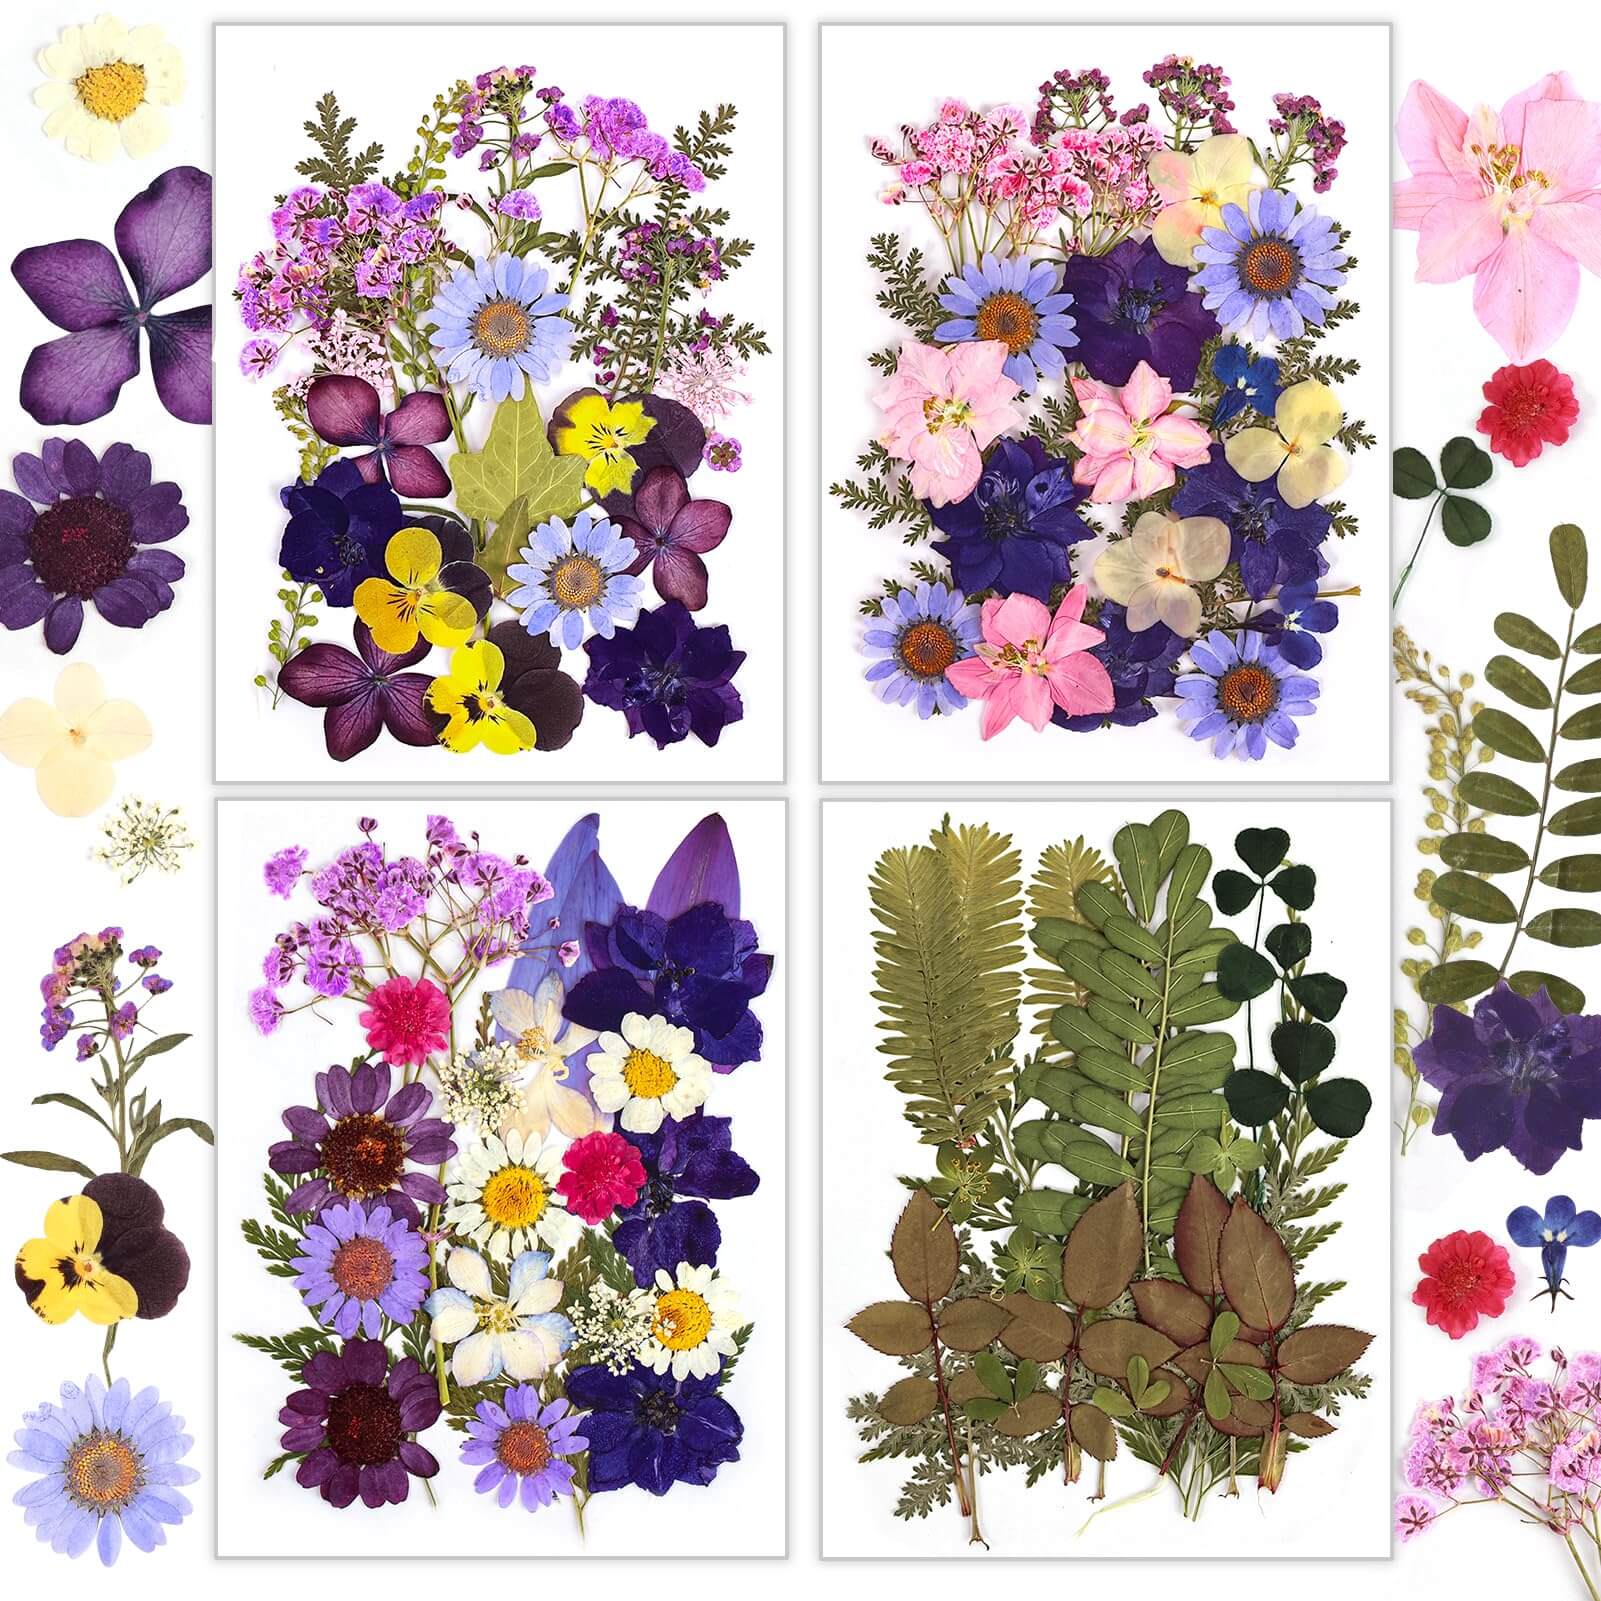 140 Pcs Dried Pressed Flowers for Resin, Real Pressed Flowers Dry Leaves  Bulk